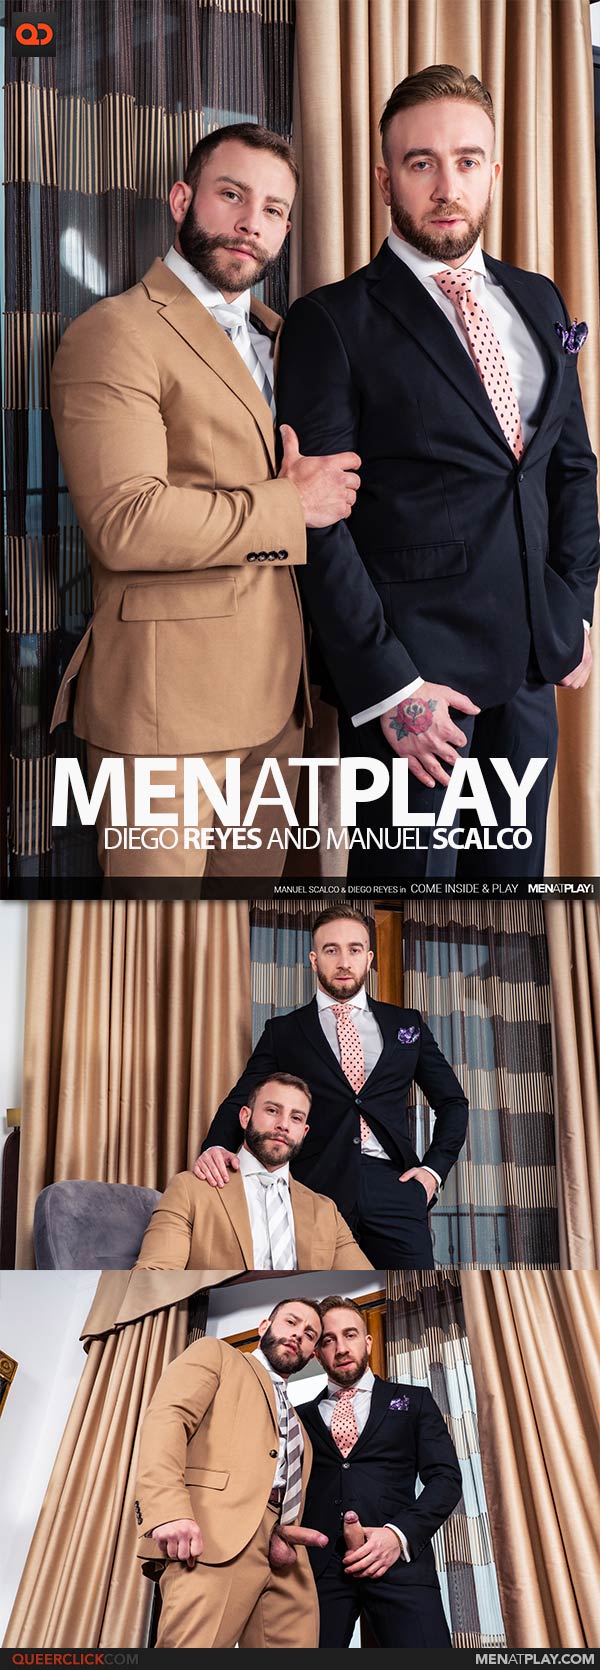 MenAtPlay: Diego Reyes and Manuel Scalco -  MenAtPlay is Giving Away 100 Free Memberships.  Click the Link Below to try Your Luck!